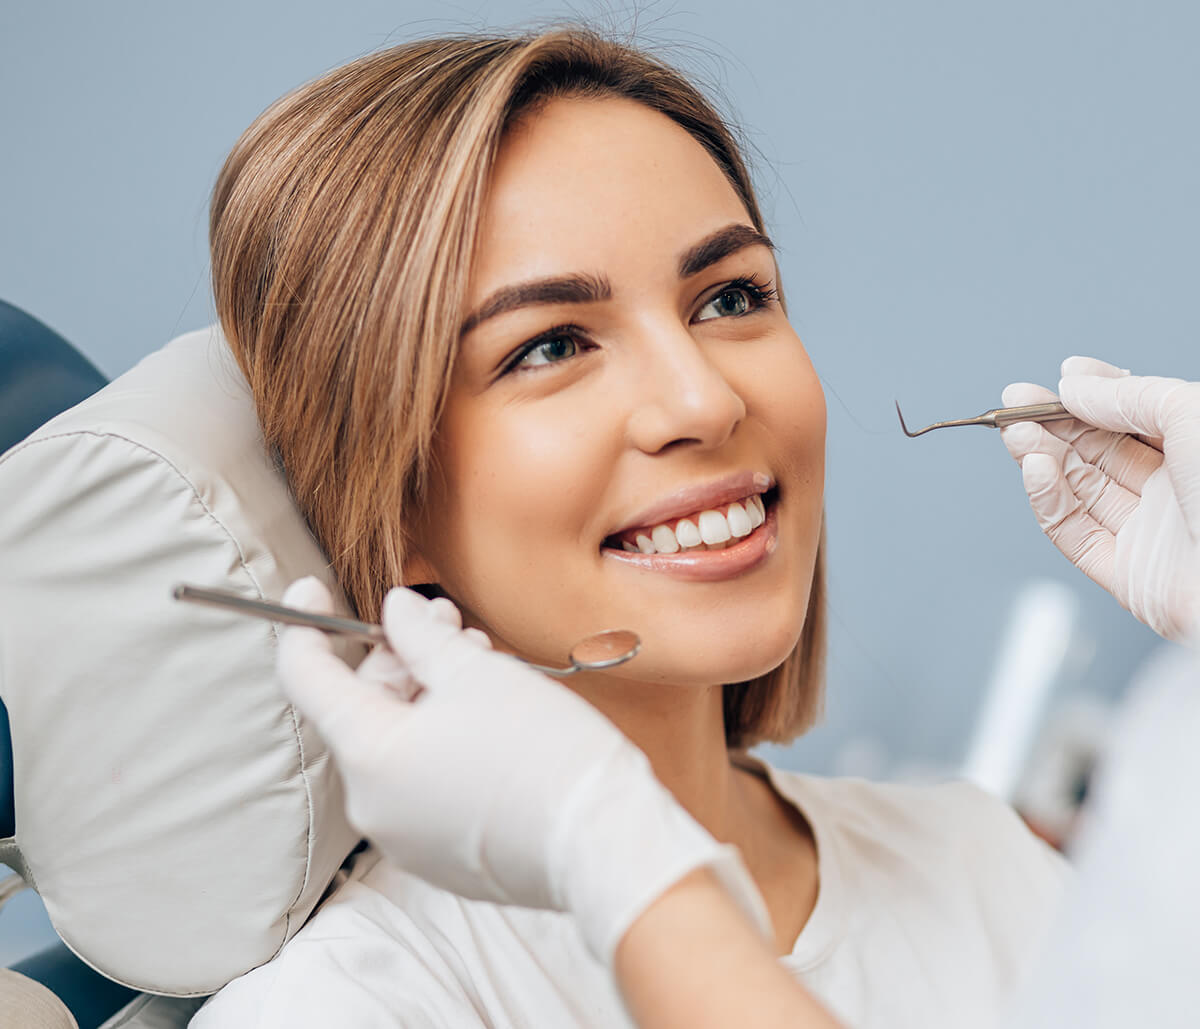 Teeth Extractions in Greenville SC Area